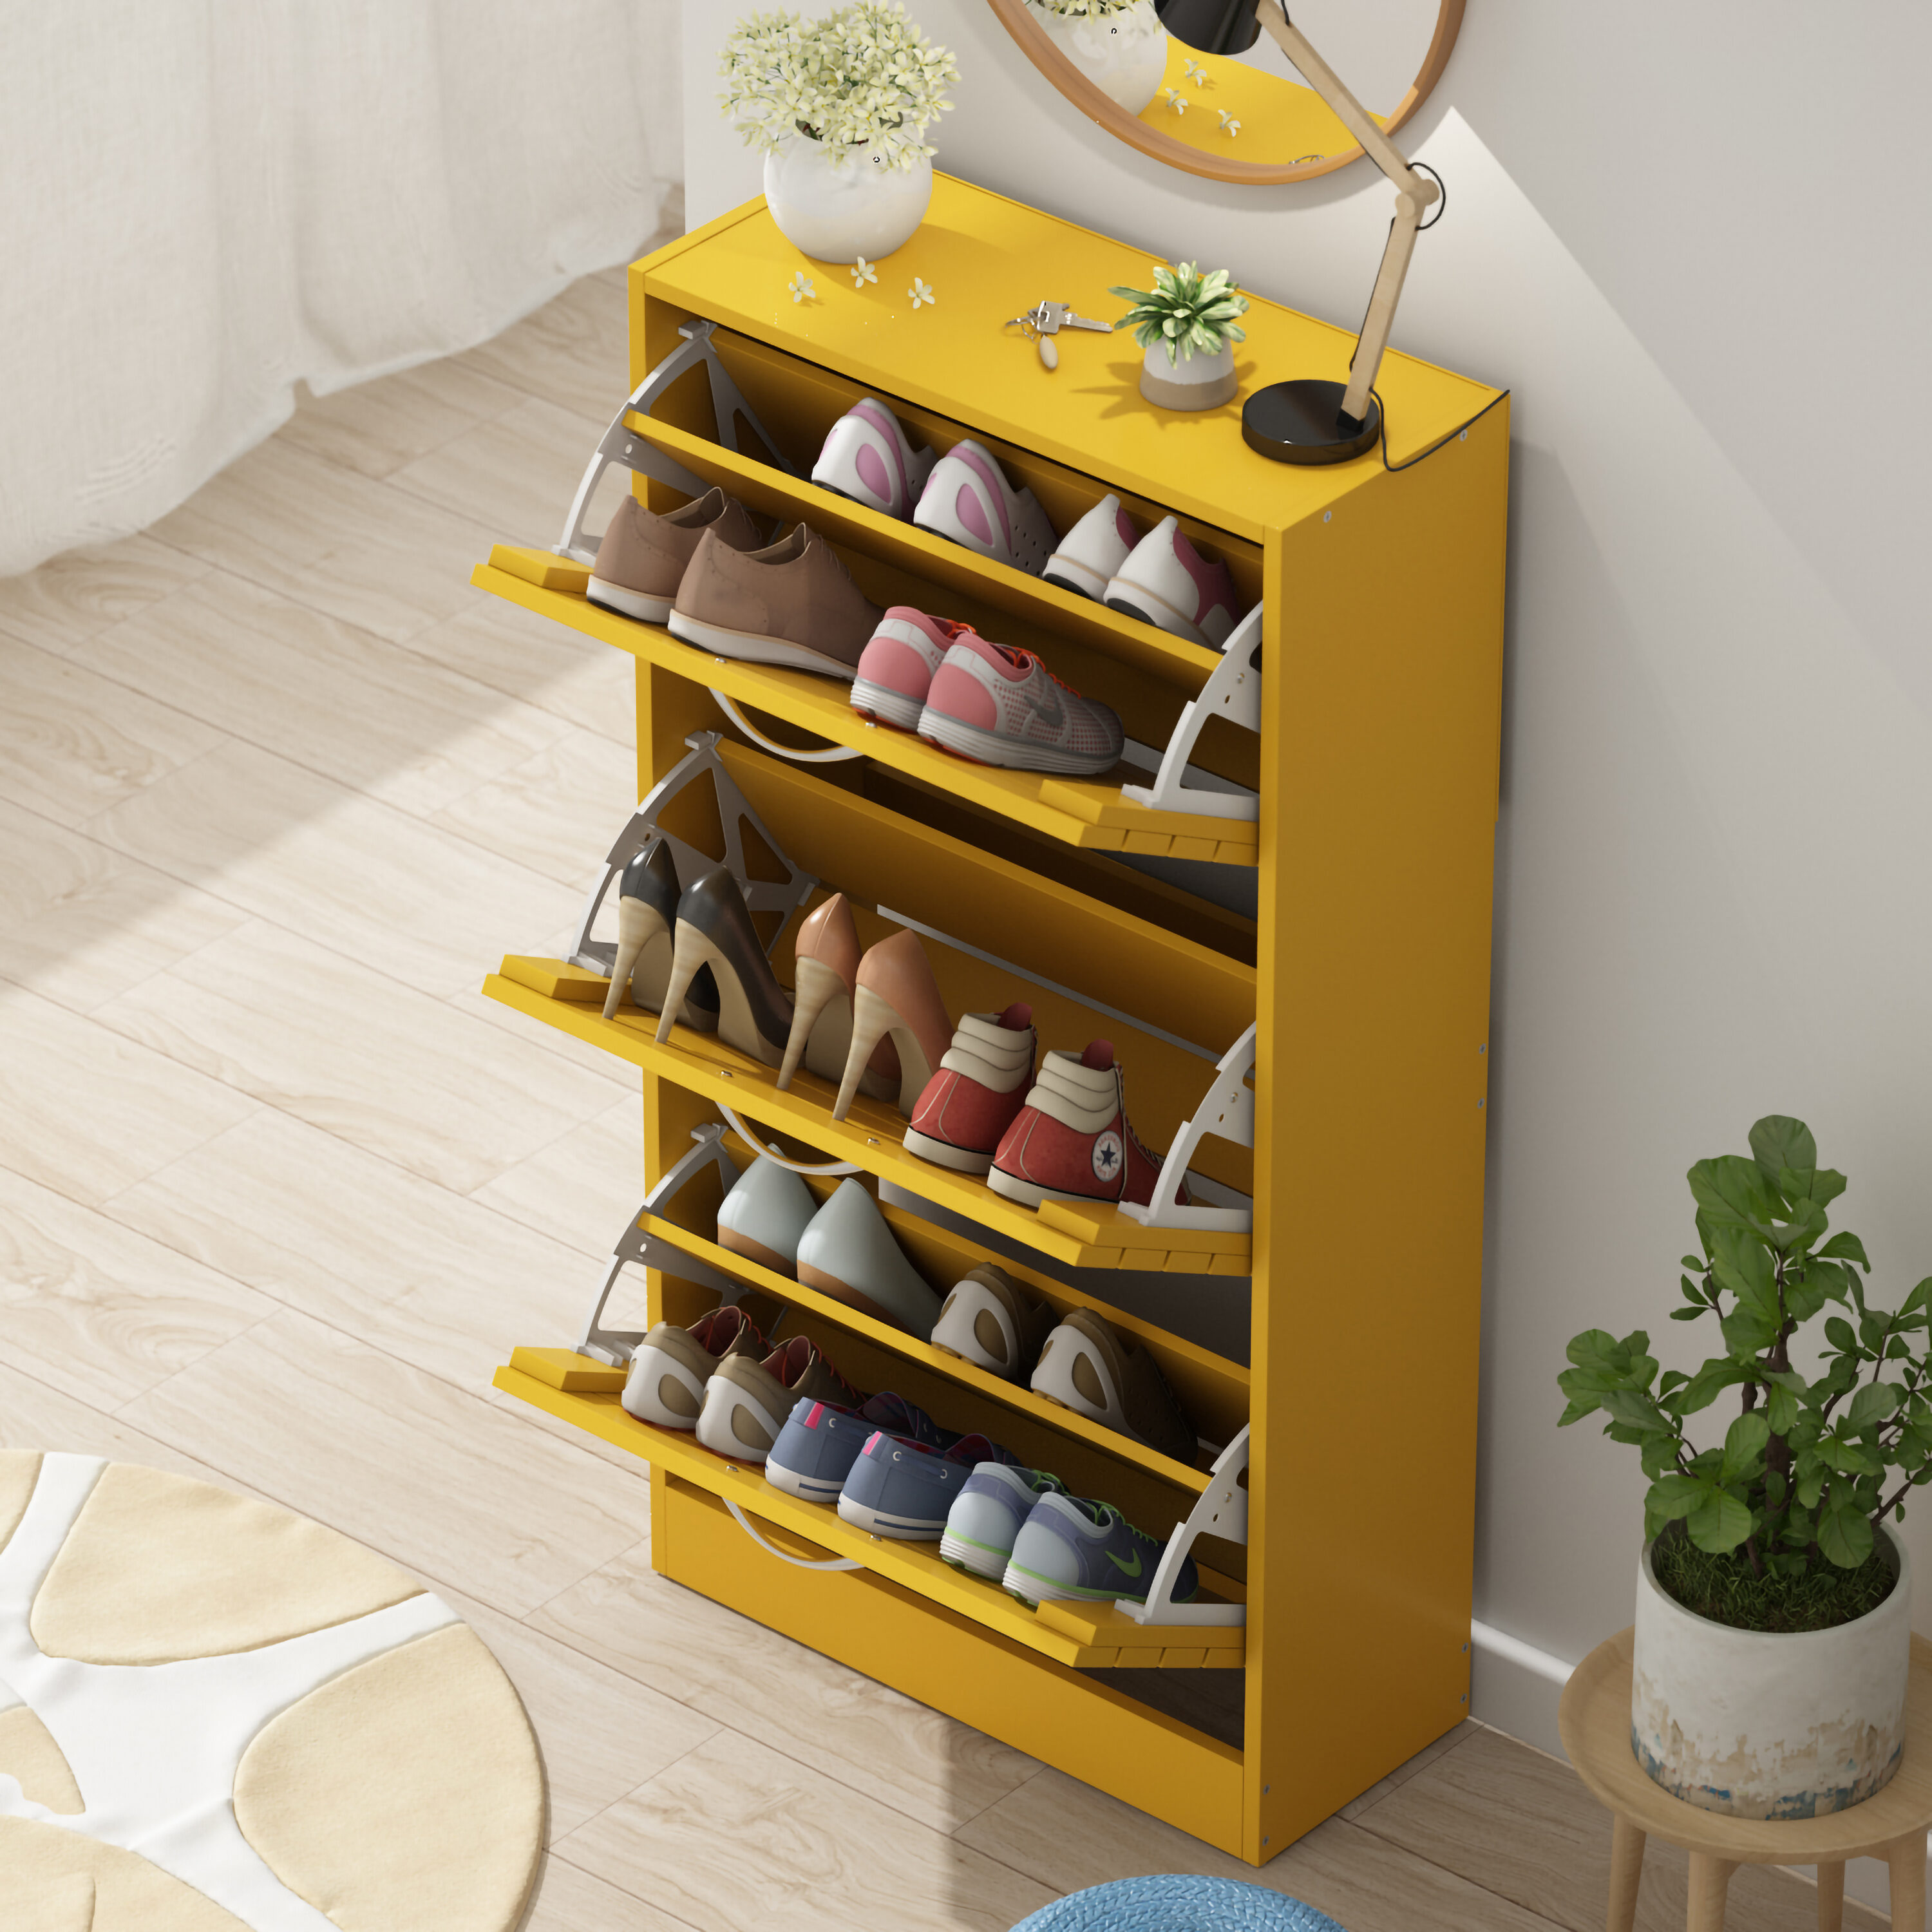 3 in Composite Tier at Shoe 42.3-in Storage Pair Shoe FUFU&GAGA 10 department Yellow the H Cabinet